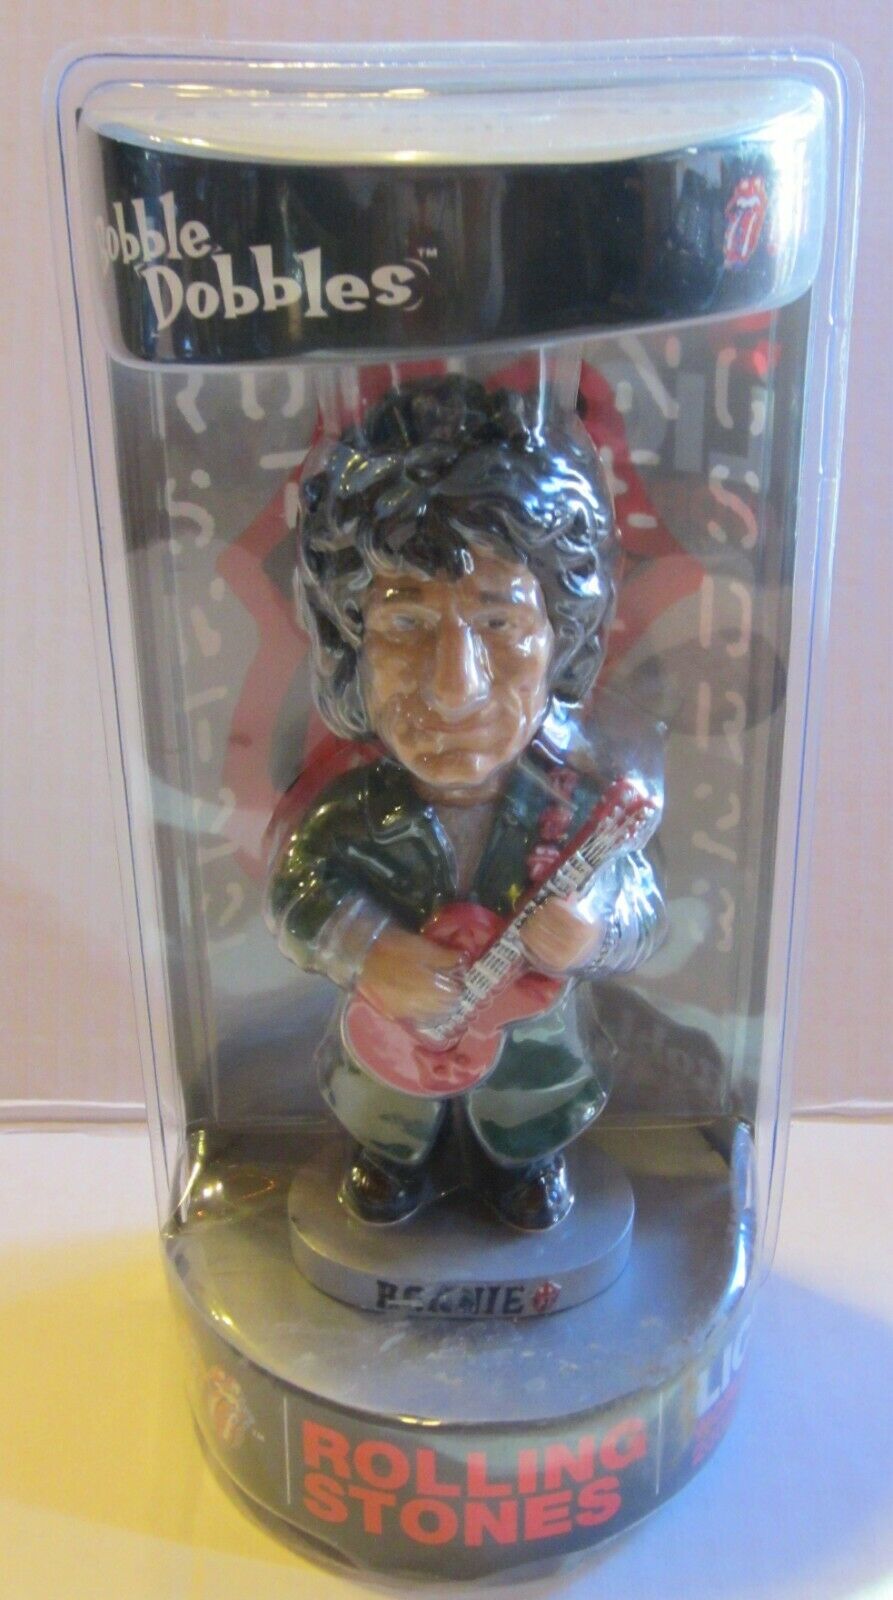 New Rolling Stones Bobblehead Ron Wood The 2002 Original Packaging